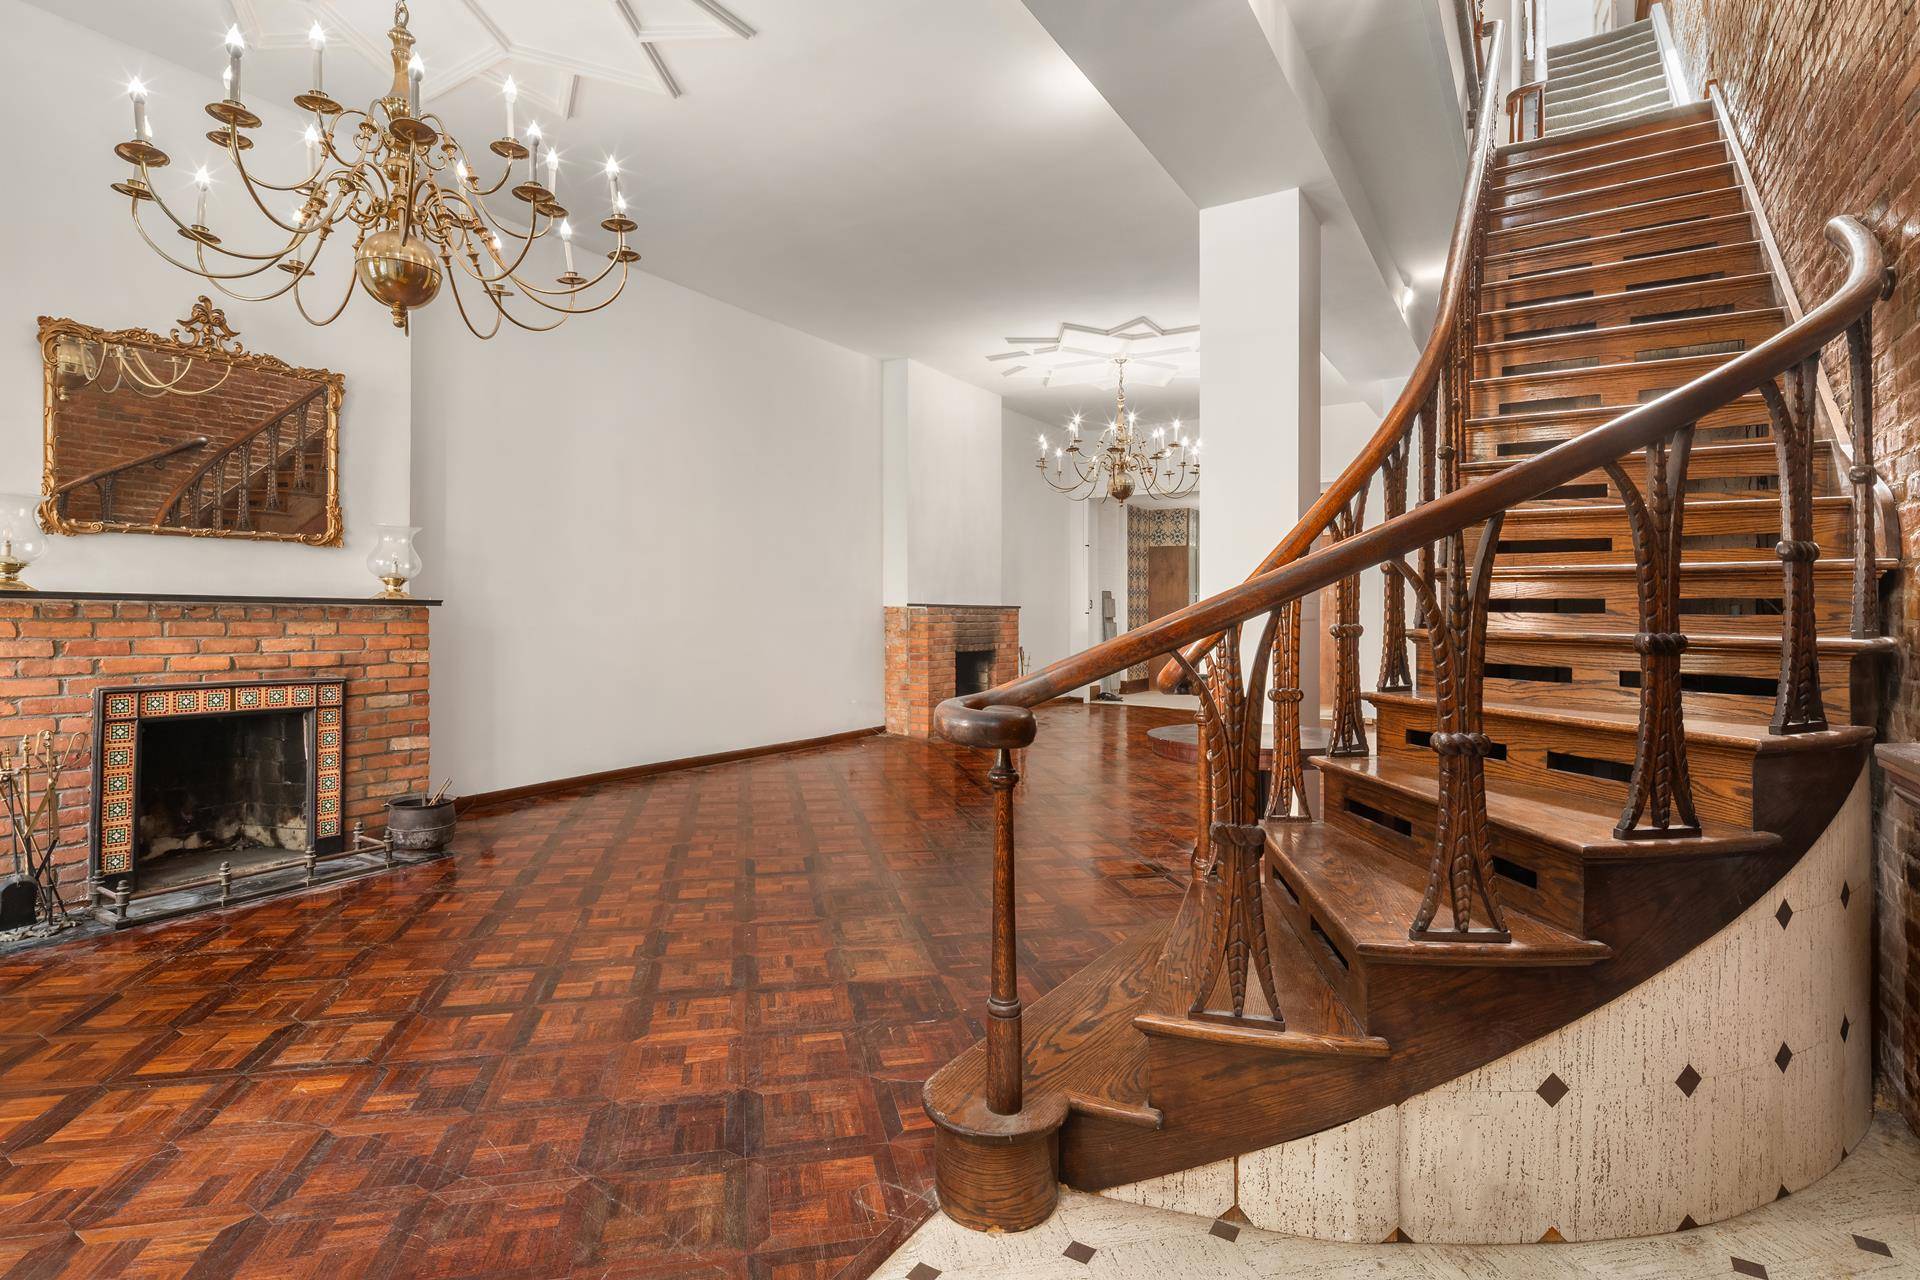 ONE OF A KIND Located on what is considered to be one of the finest townhouse blocks in all of lower Manhattan, the Isaac Phillips House offers a rare opportunity ...